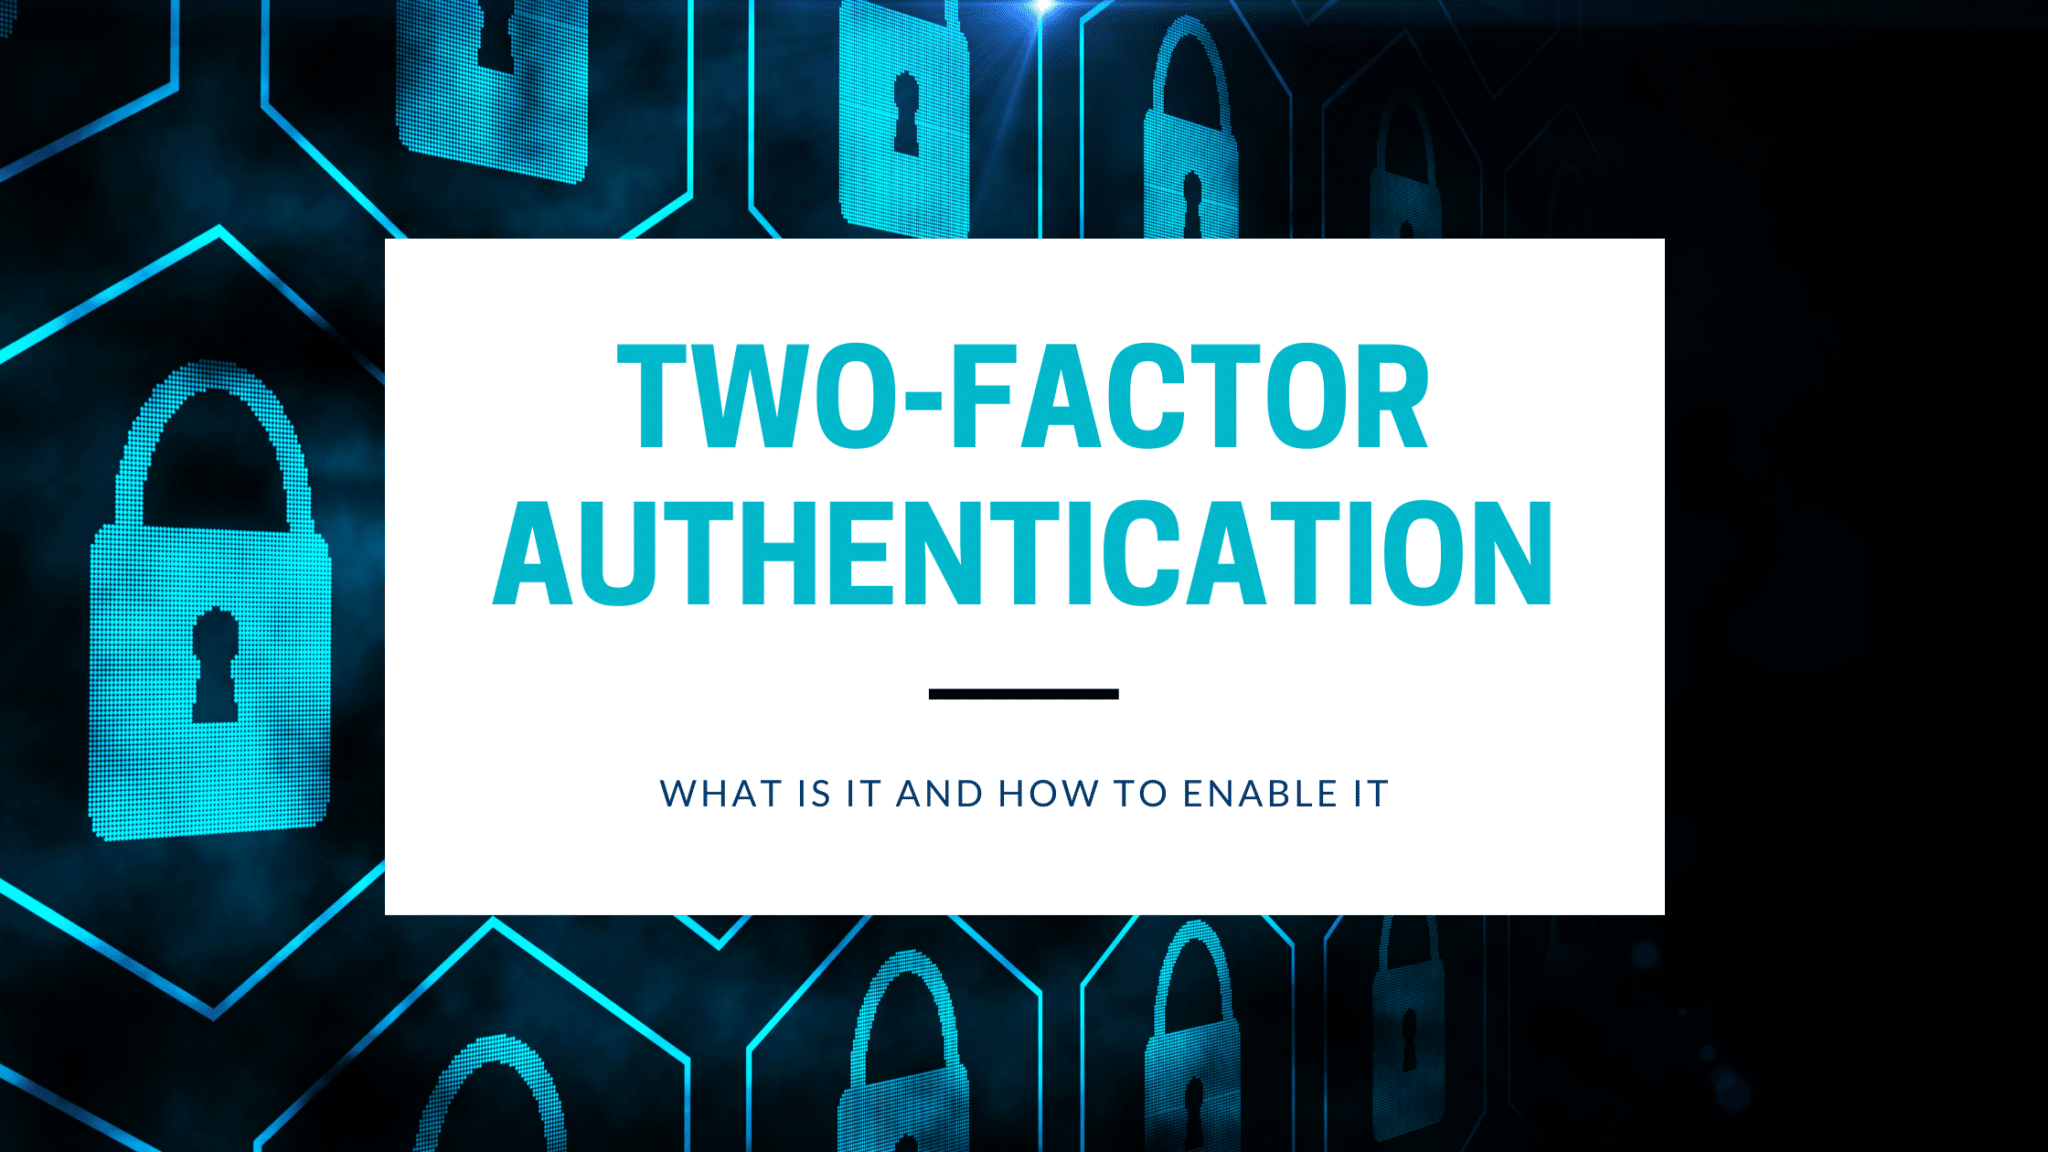 In this image, two-factor authentication is being explained, including what it is and how to enable it.